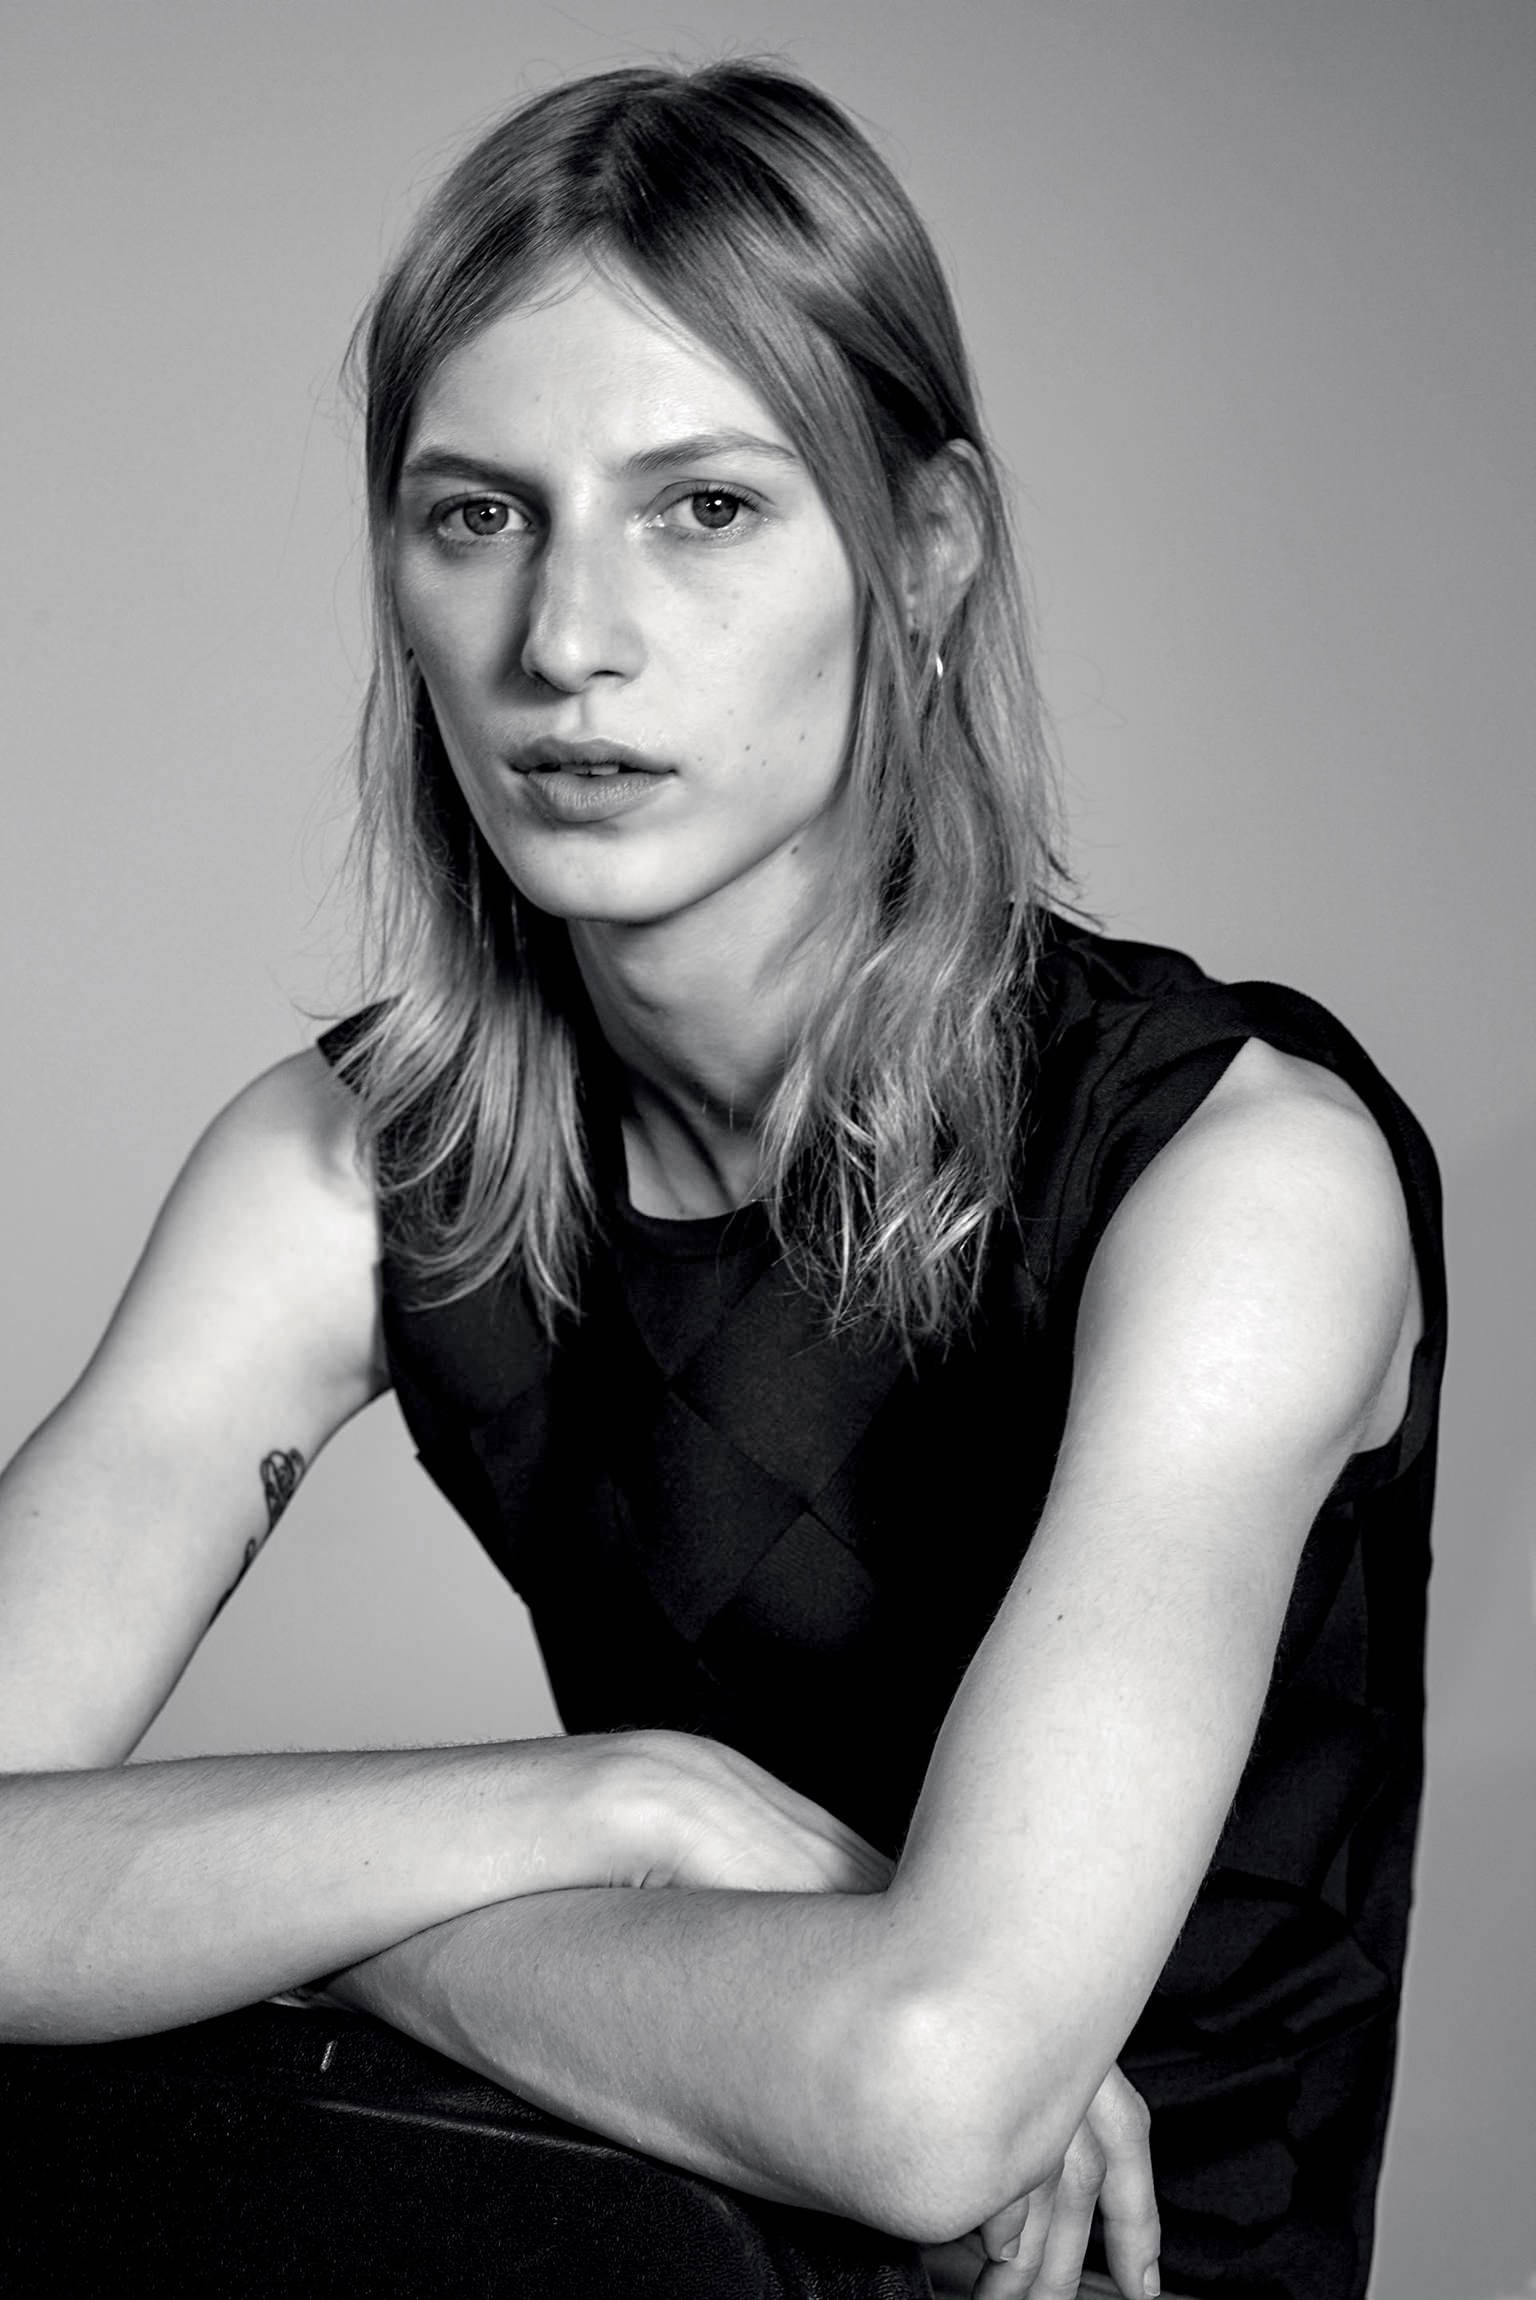 A Melancholic Black And White Shot Of The Australian Model, Julia Nobis, As She Posed Seriously Sitting Down